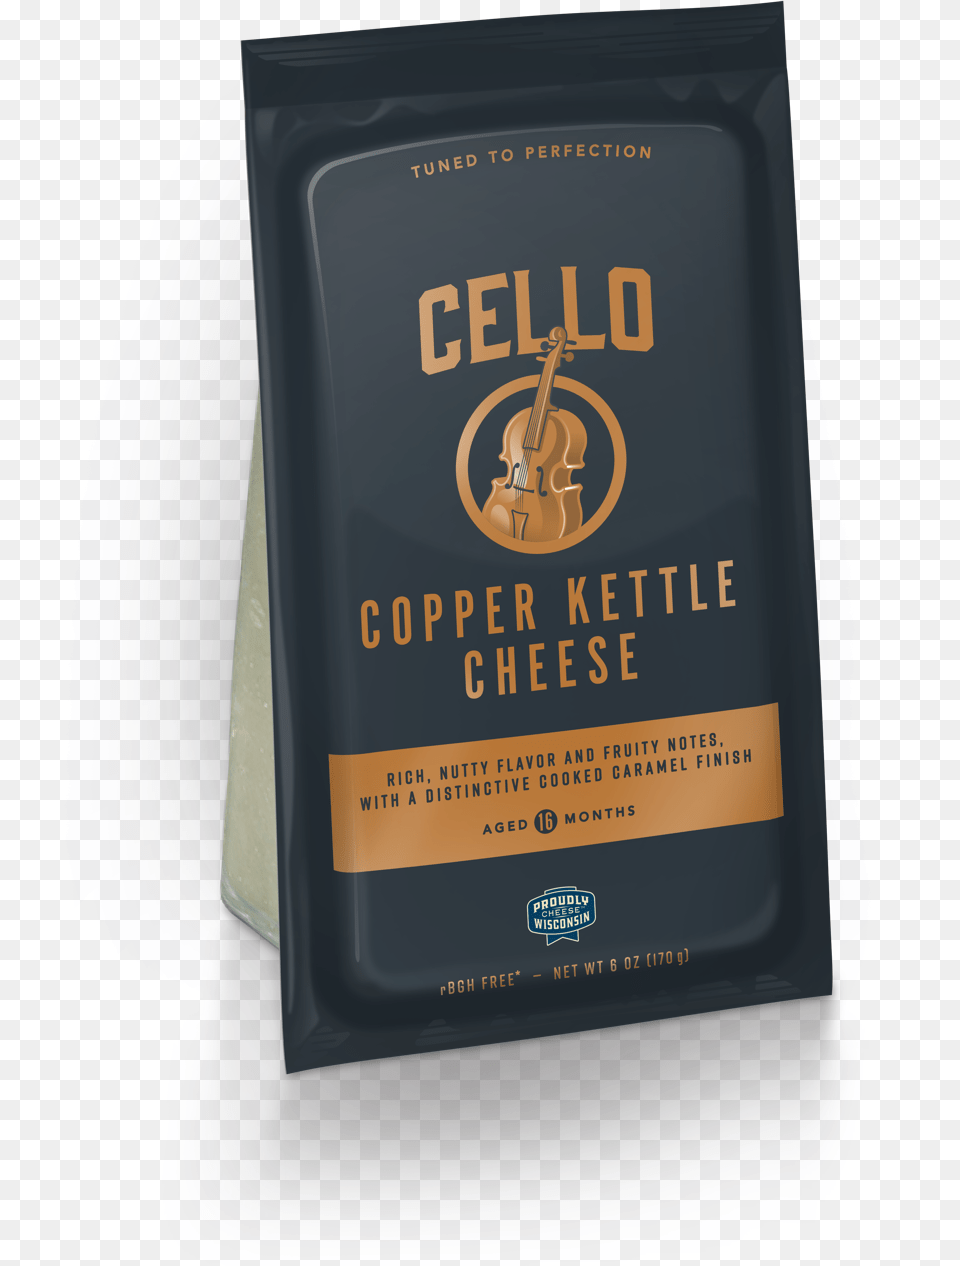 Cello Copper Kettle Cheese Packaging And Labeling, Bottle Free Png Download